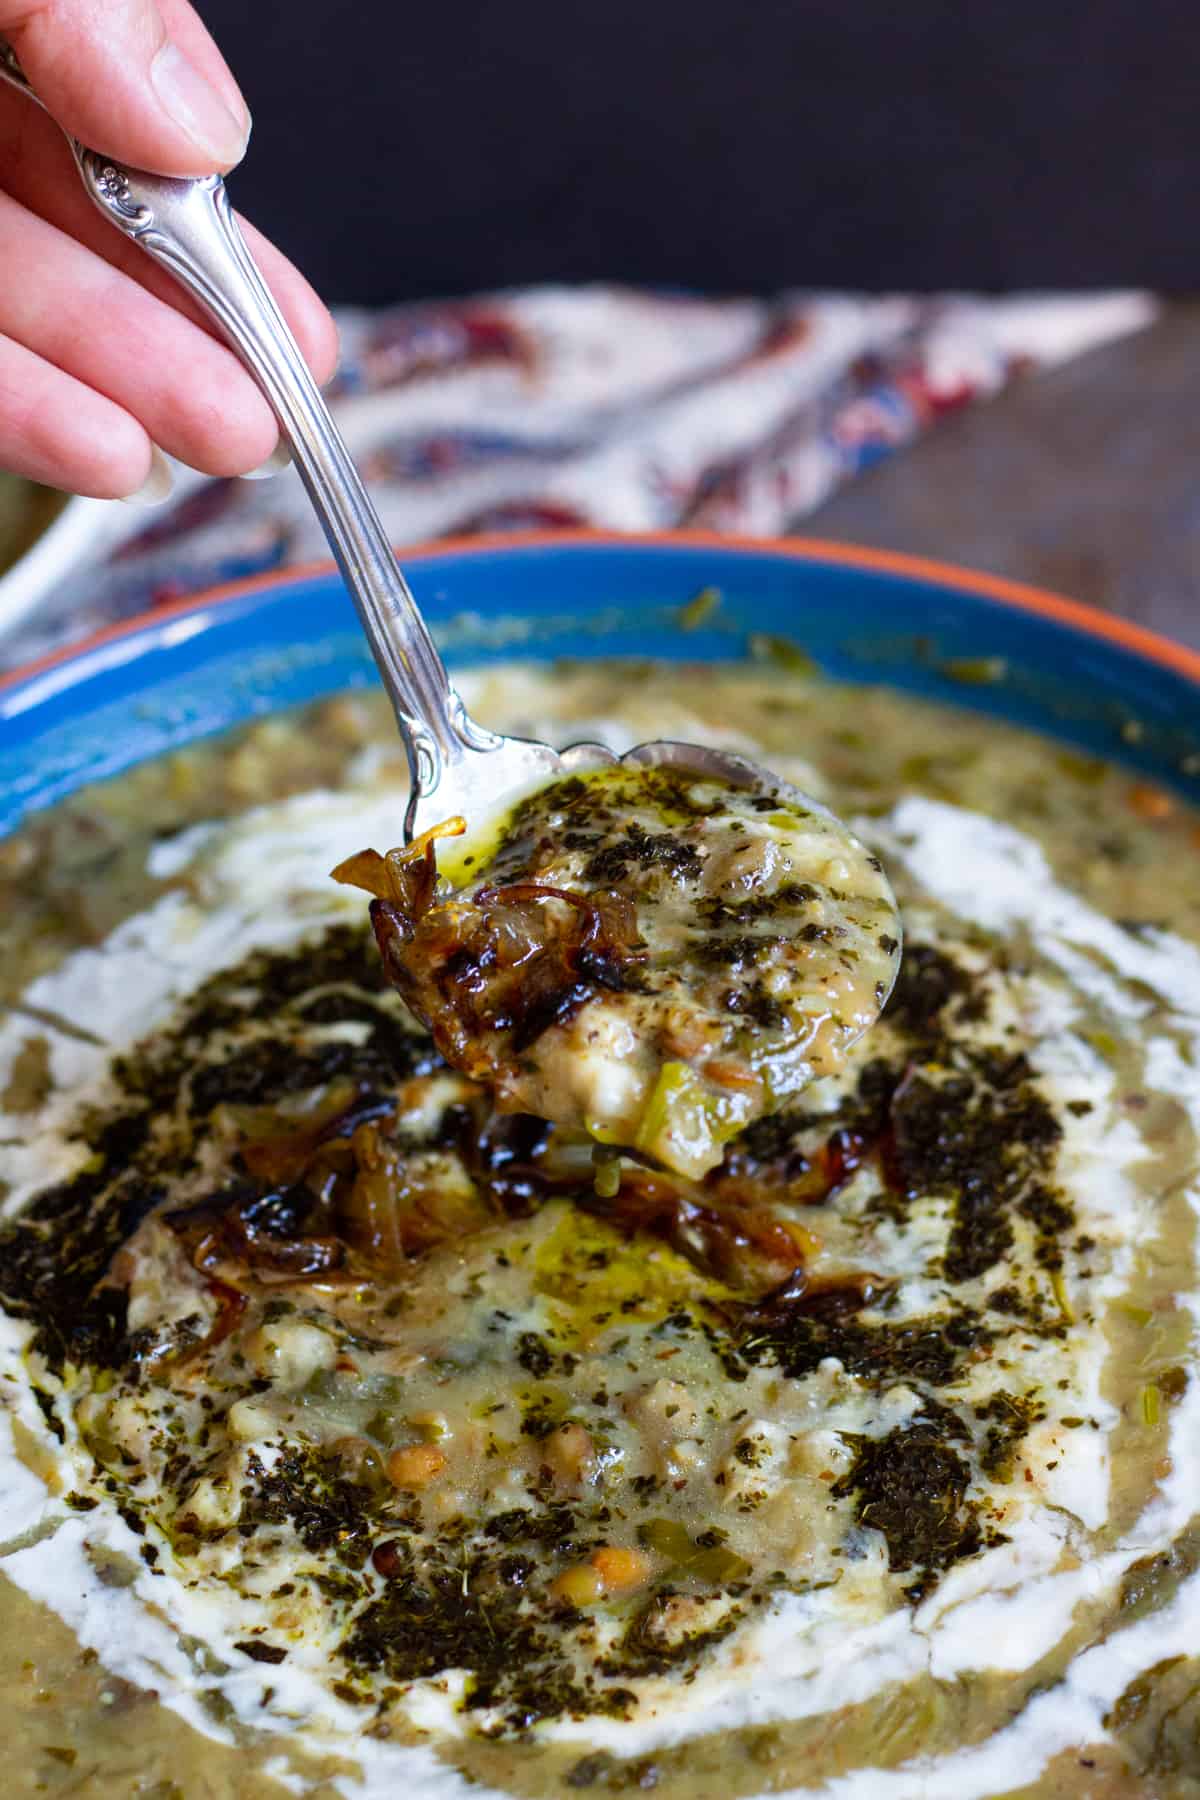 Filled with nutrient ingredients and great flavors, this Persian Eggplant Soup - Ash-e Bademjan is a delicious choice for cold days. This vegetarian and gluten free soup is super tasty!